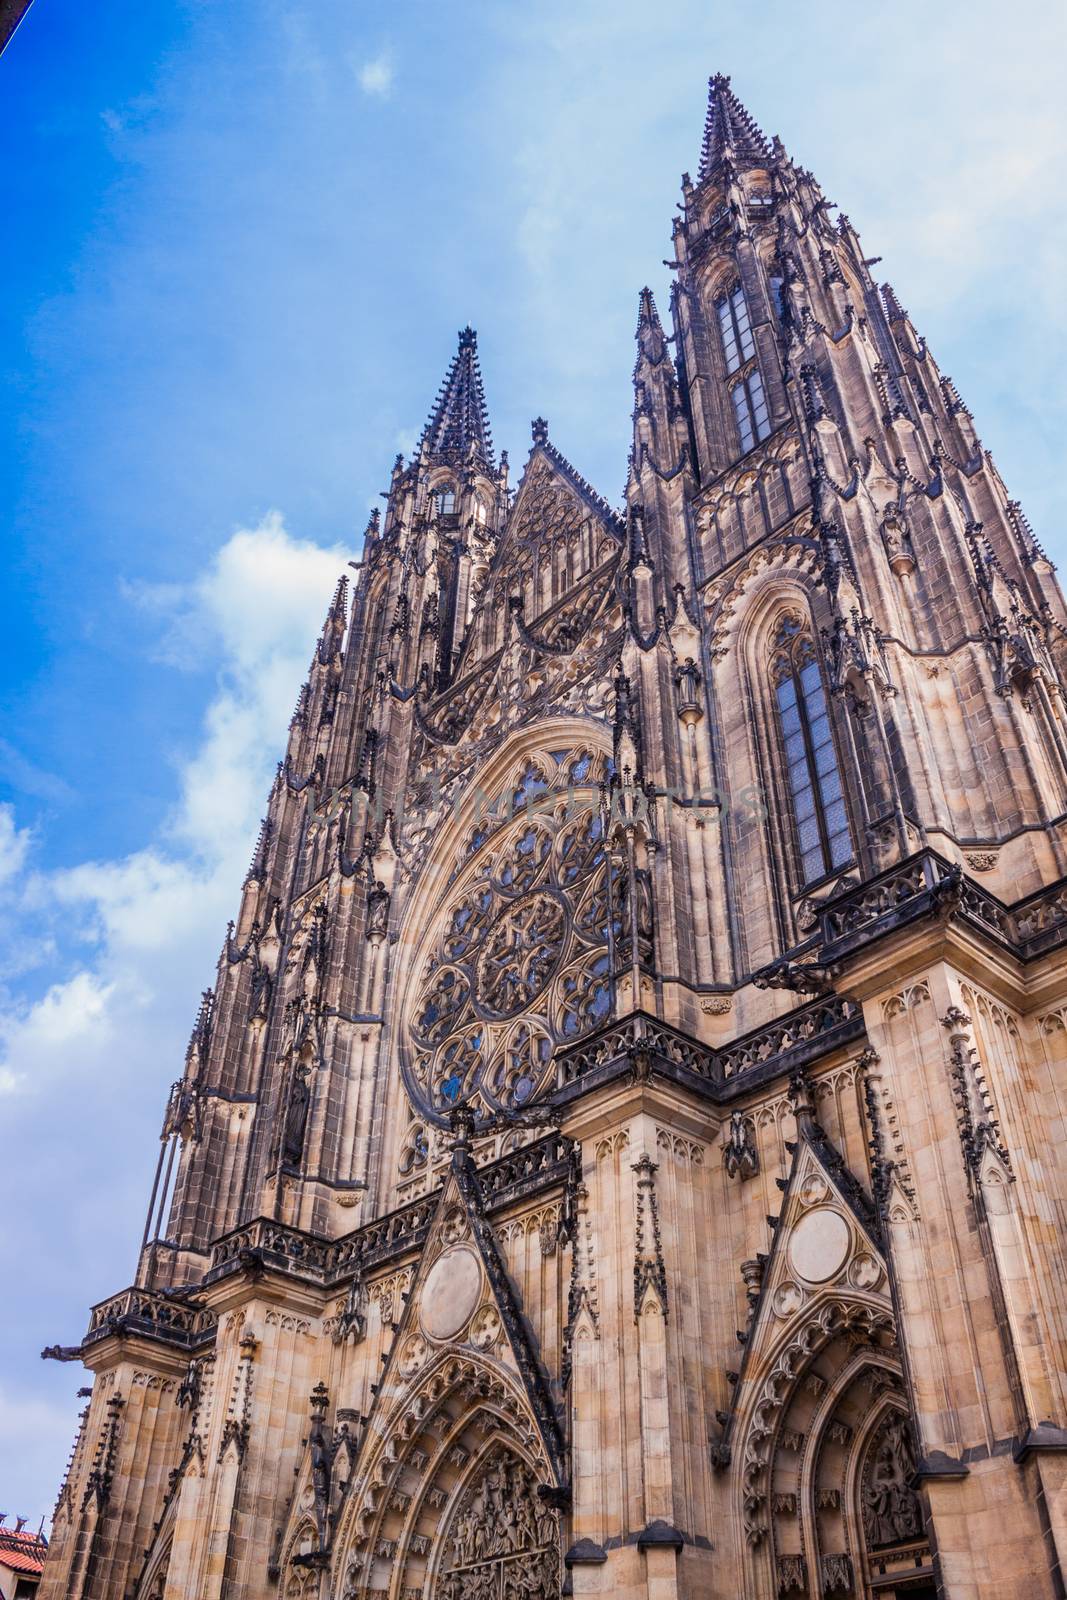 The west facade of St. Vitus Cathedral in Prague (Czech Republic by bloodua